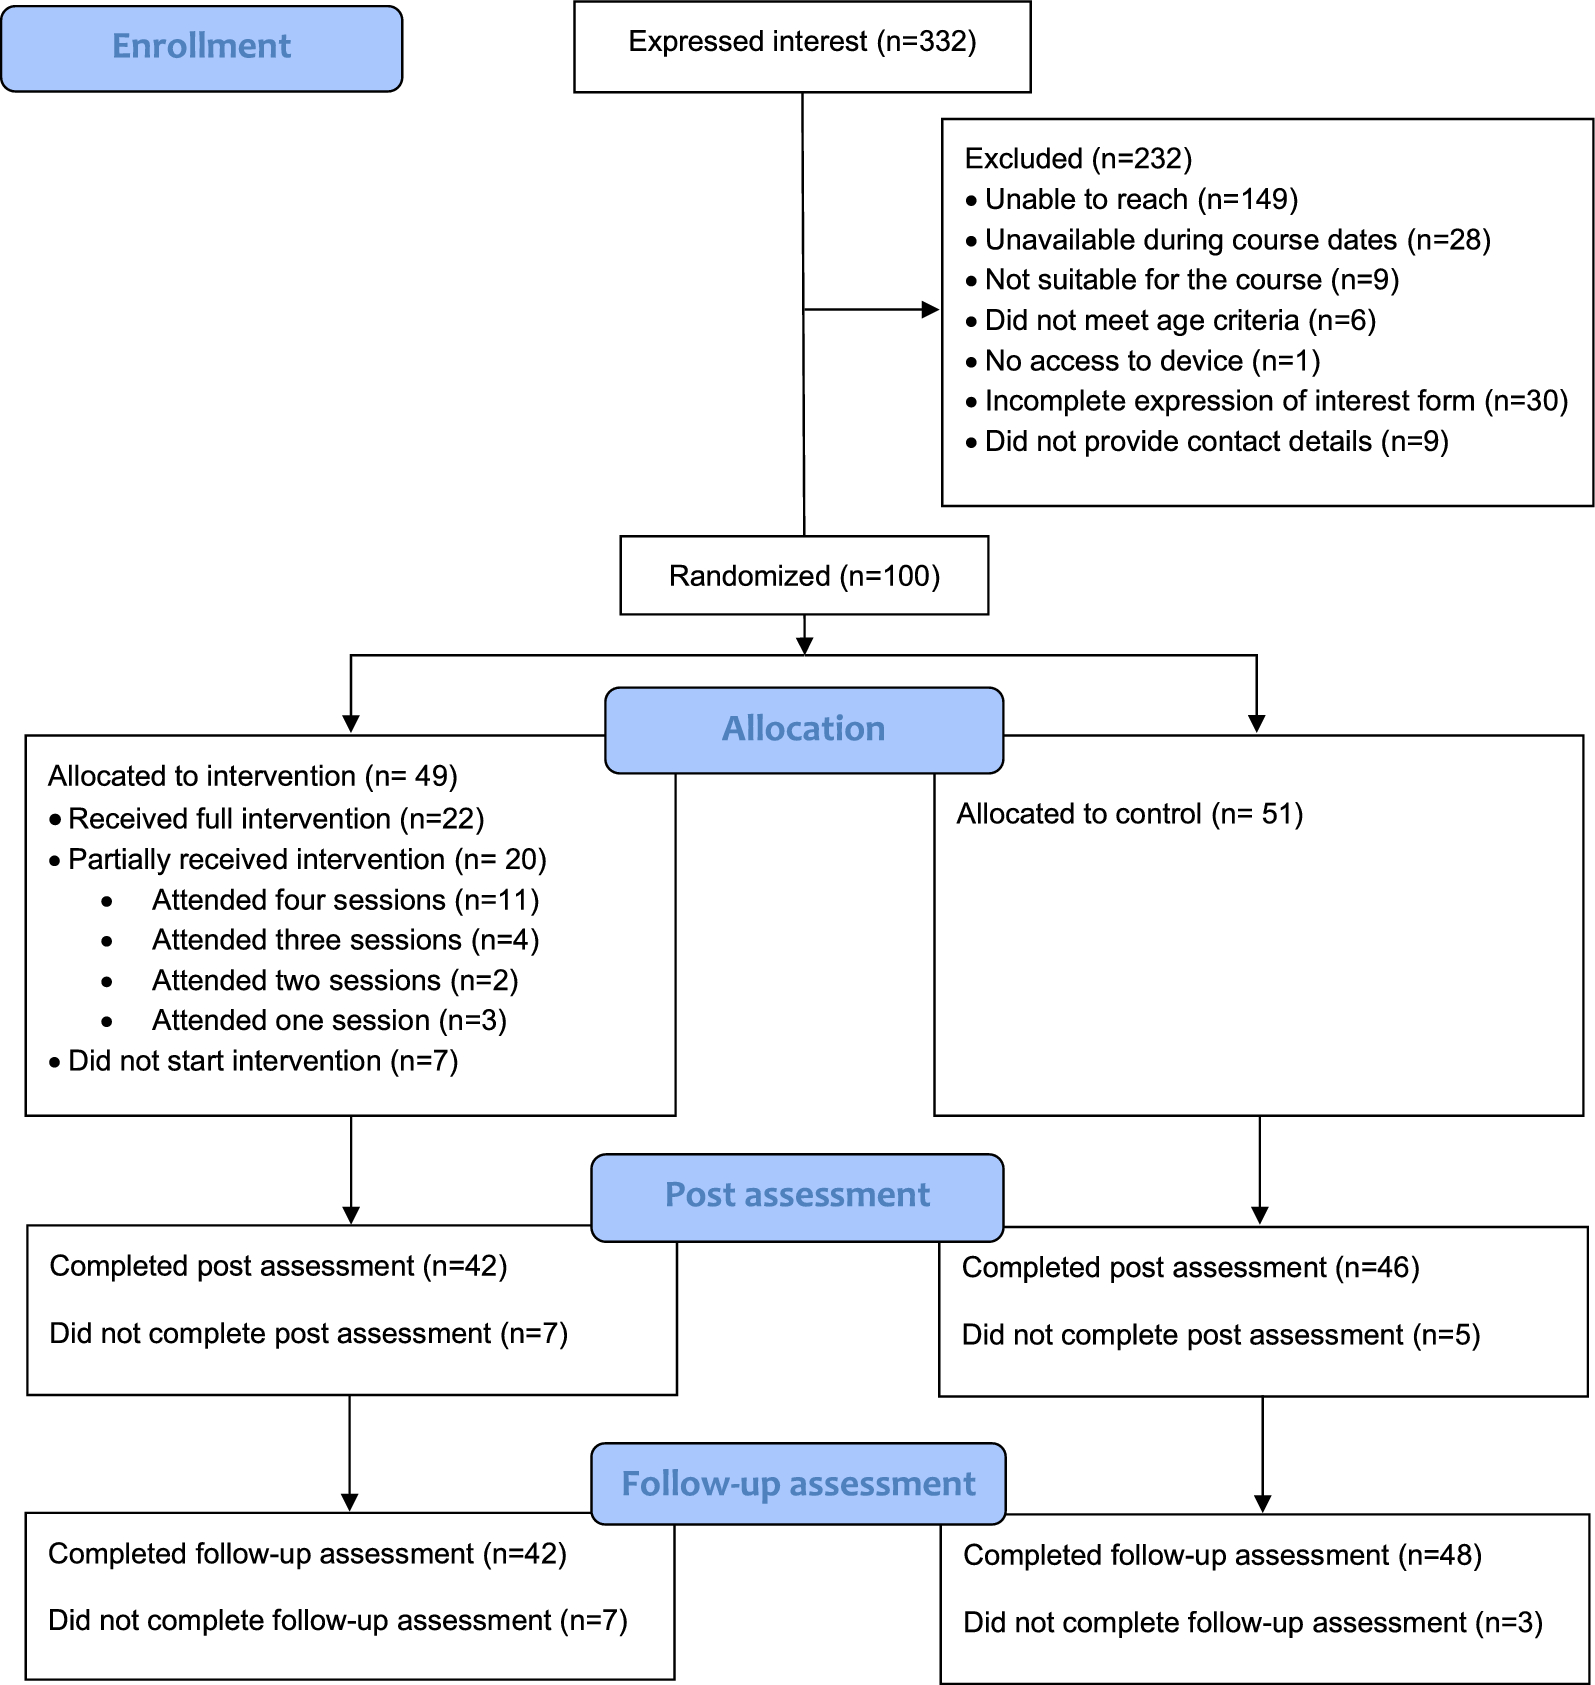 Online peer-led intervention to improve adolescent wellbeing during the COVID-19 pandemic: a randomised controlled trial